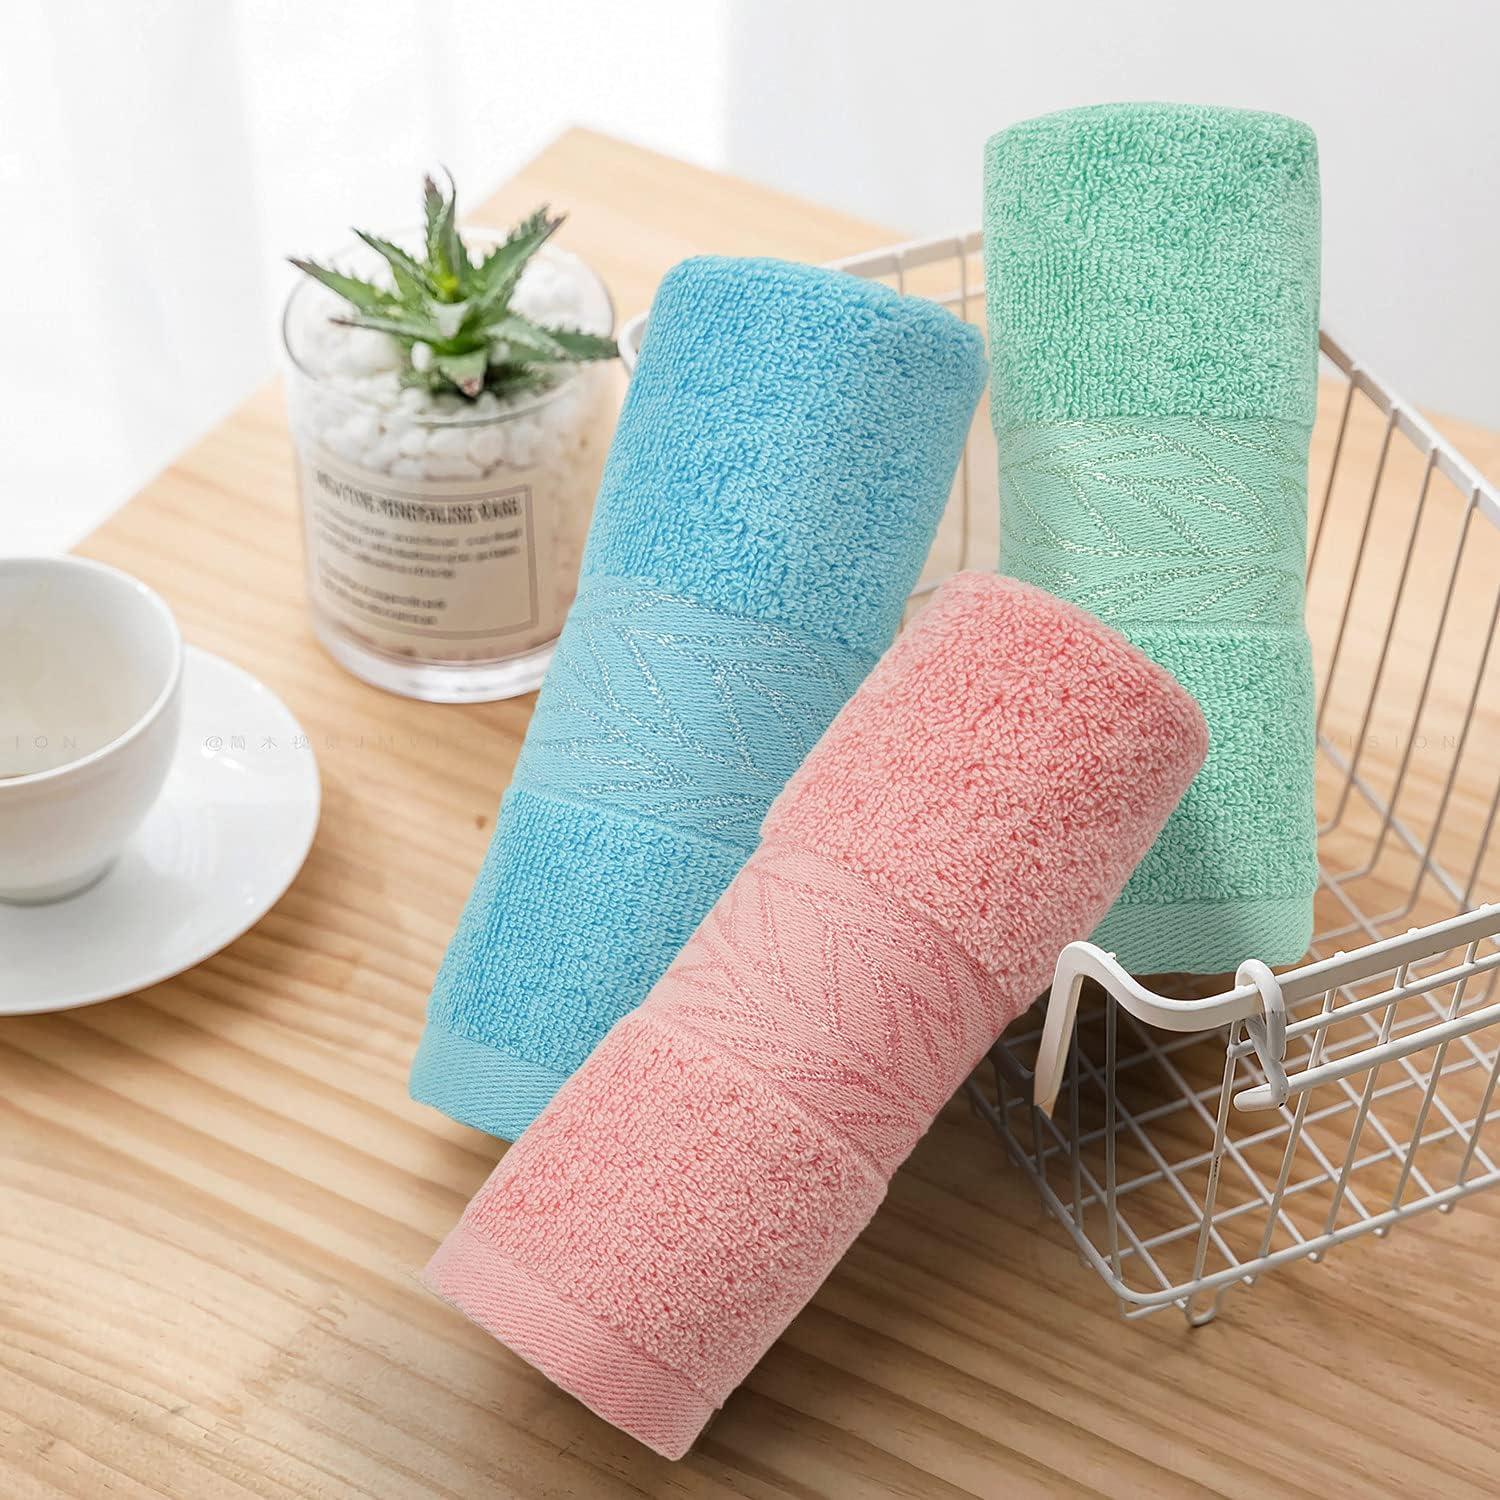 Cleanbear Cotton Washcloths Bath Wash Cloth Set 13 x 13 Inches, 6-Pack Face  Cloths with 3 Colors